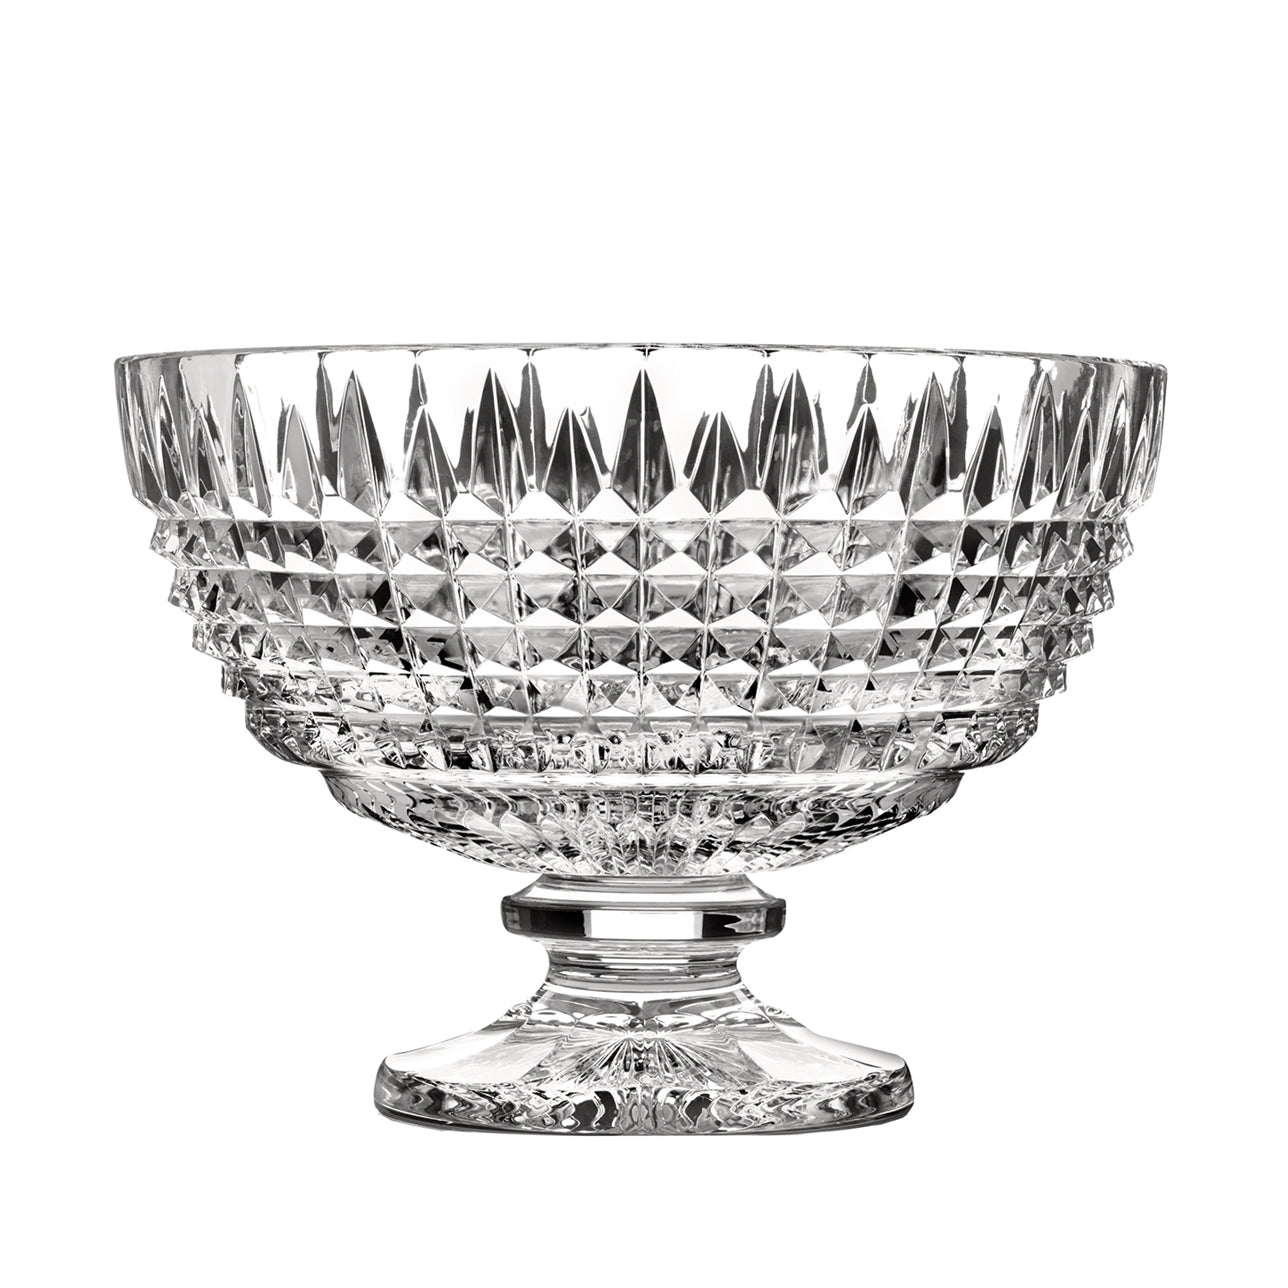 Lismore Diamond Footed Centerpiece  The Lismore Diamond pattern is a strikingly modern reinvention of the Waterford classic, characterized by intricate diamond cuts rendered in radiant fine crystal.